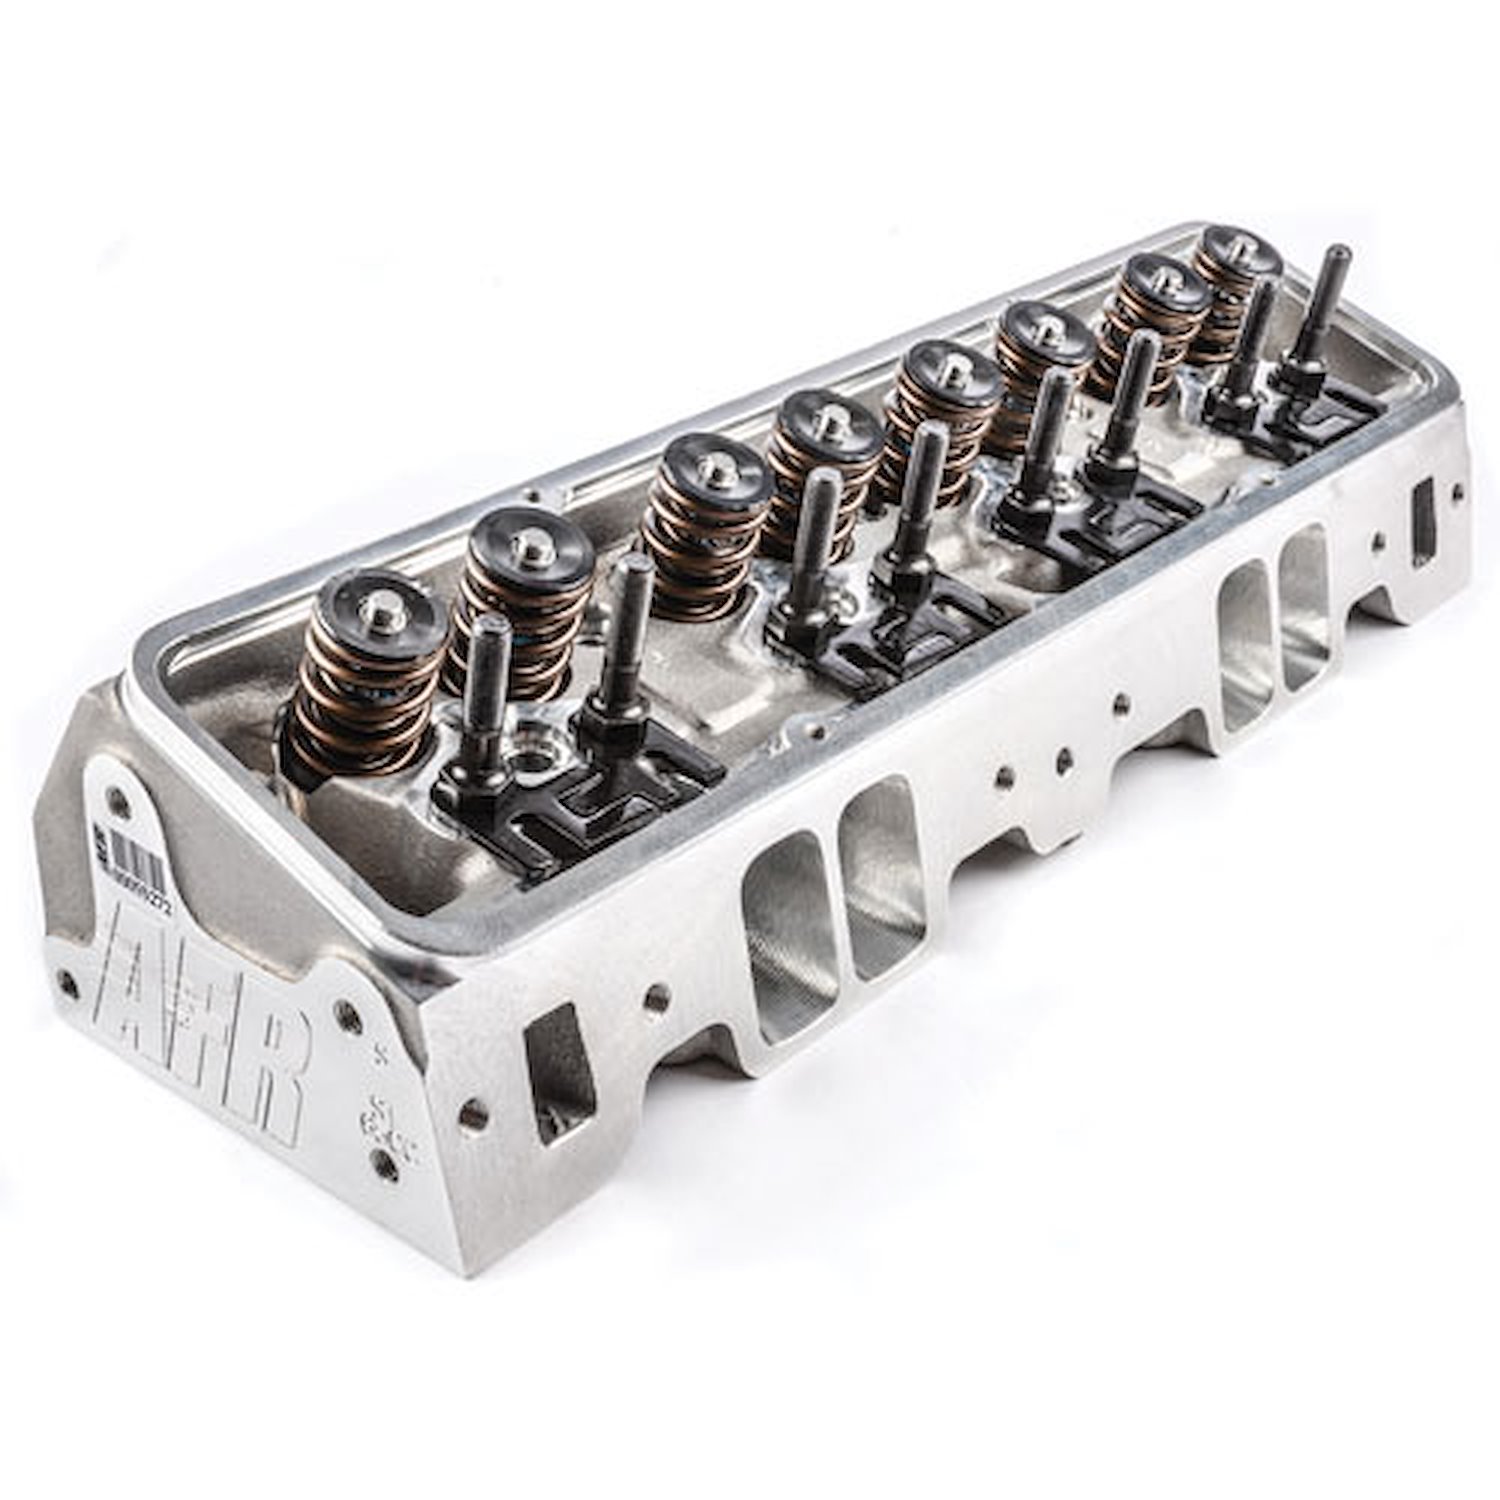 195cc Eliminator Street Aluminum Cylinder Heads SB-Chevy 1987-95 Cast Iron Head Engines with 72° Center Intake Bolt Angle